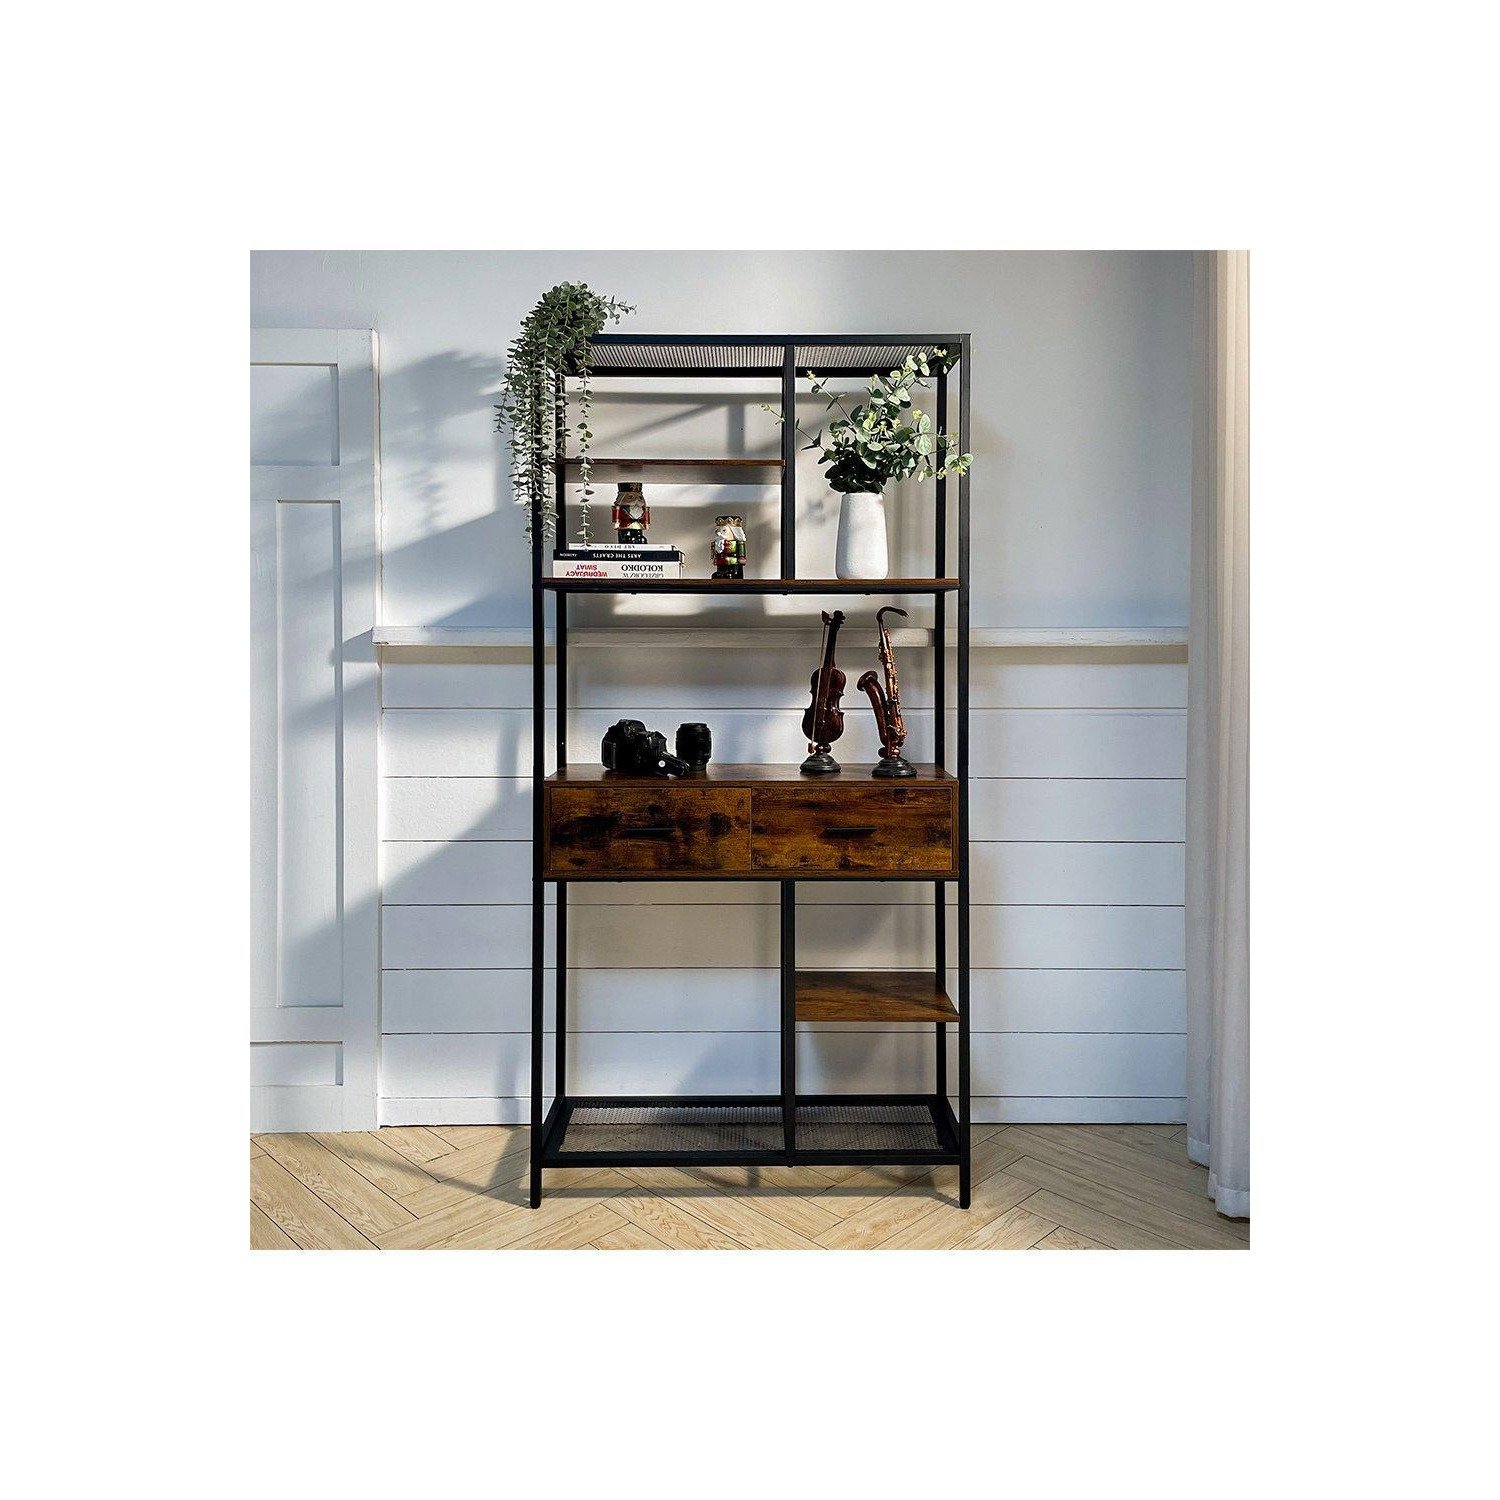 Vintage Plant Stand Storage Shelf with Drawers - image 1